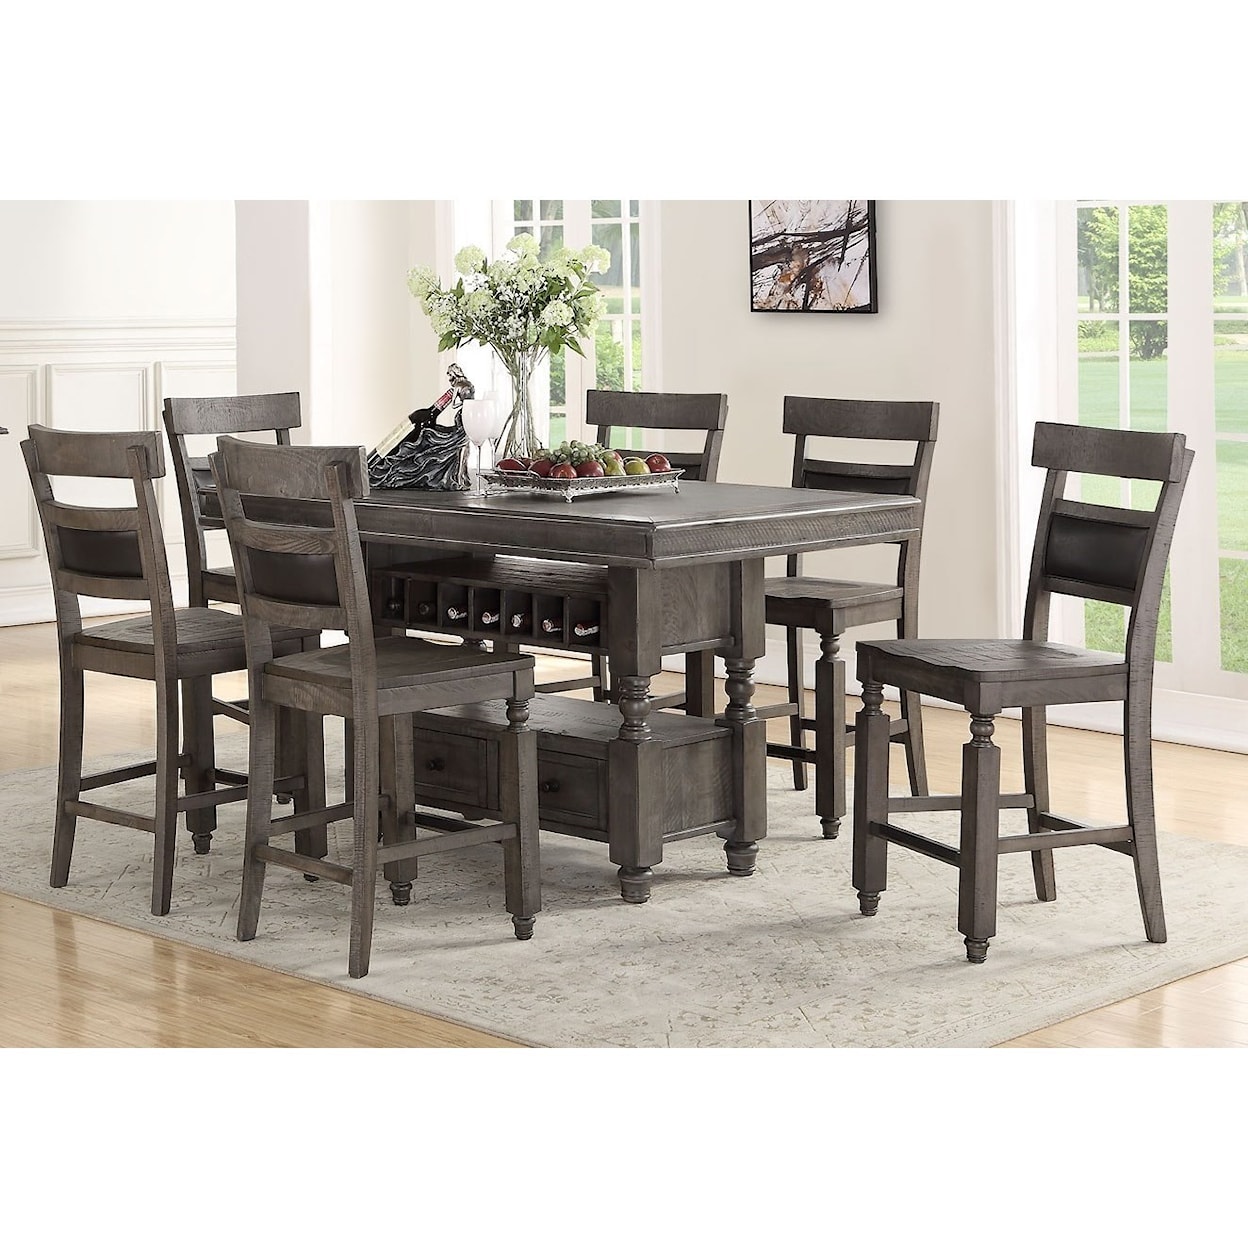 Avalon Furniture Sutter 7-Pc Pub Table and Chair Set